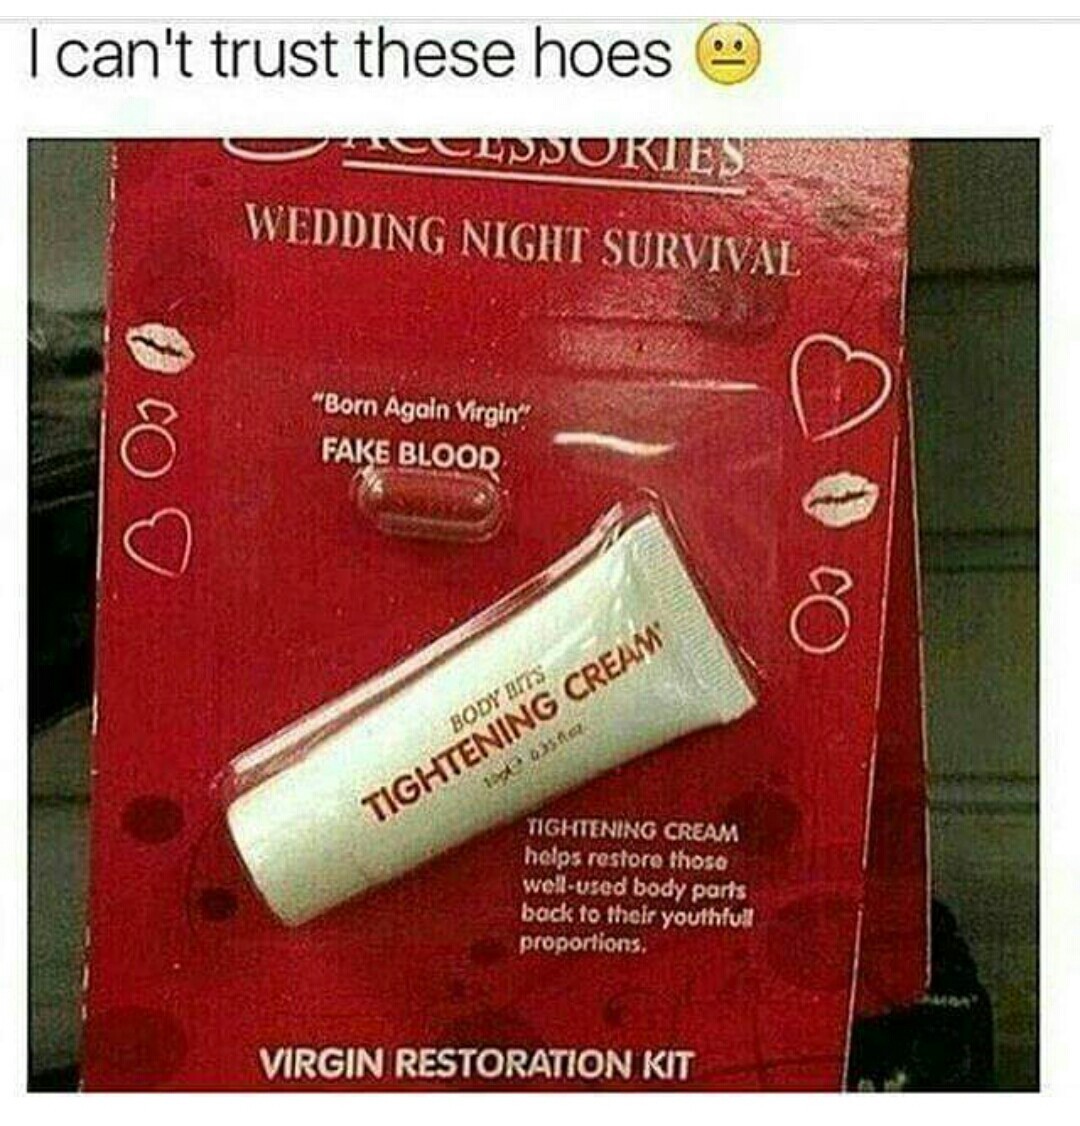 Can't trust this hoes - meme